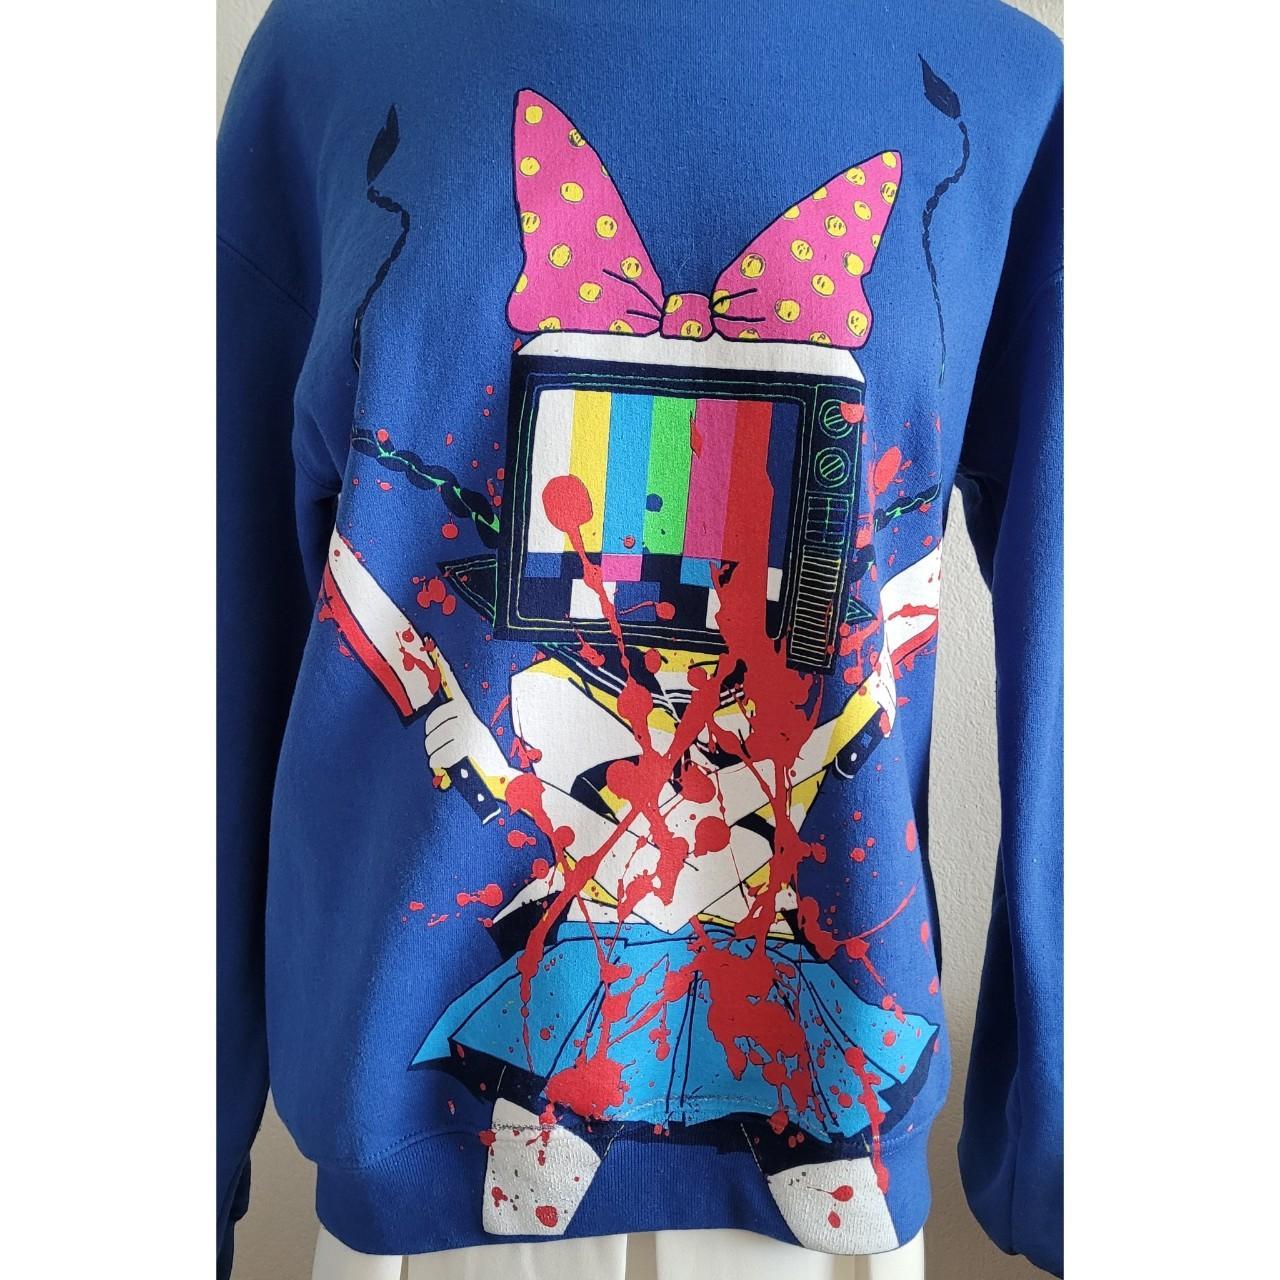 Product Image 2 - Vintage OMOCAT sweater!

This style is